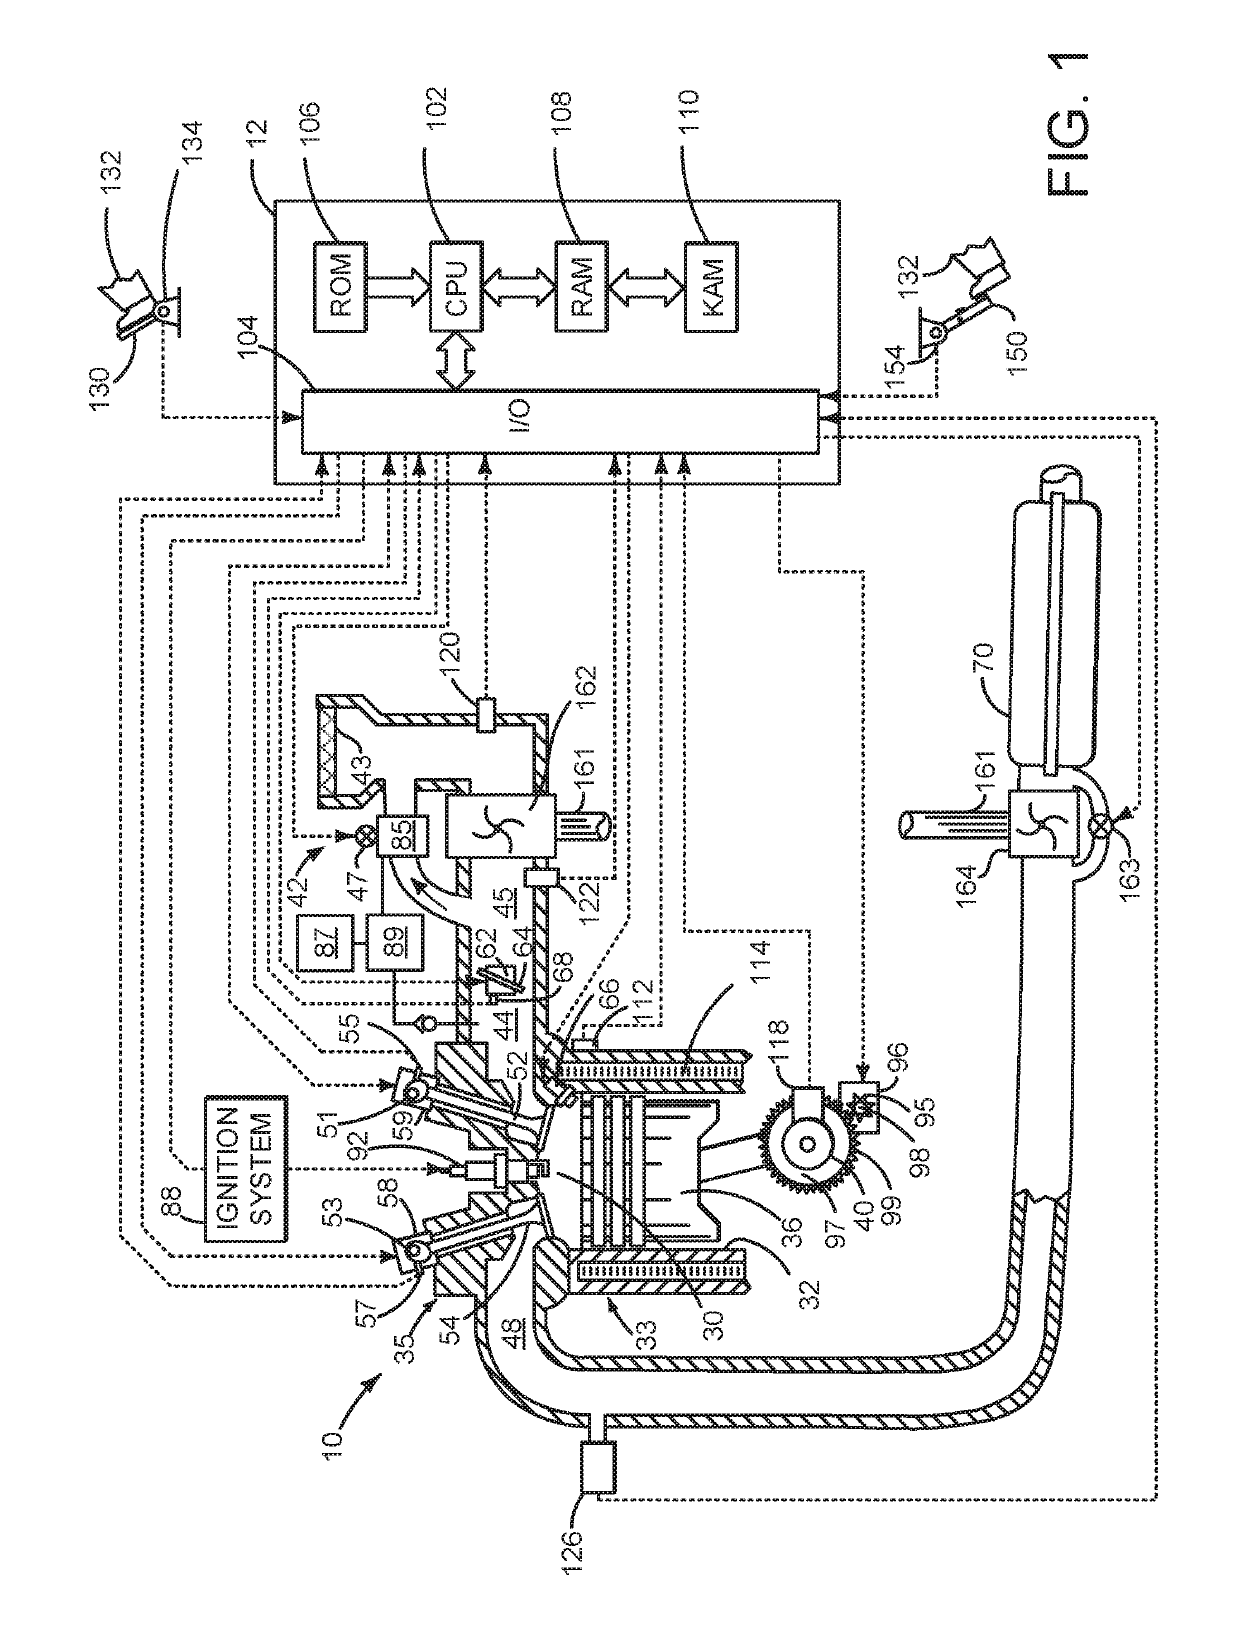 Methods and system for operating an engine